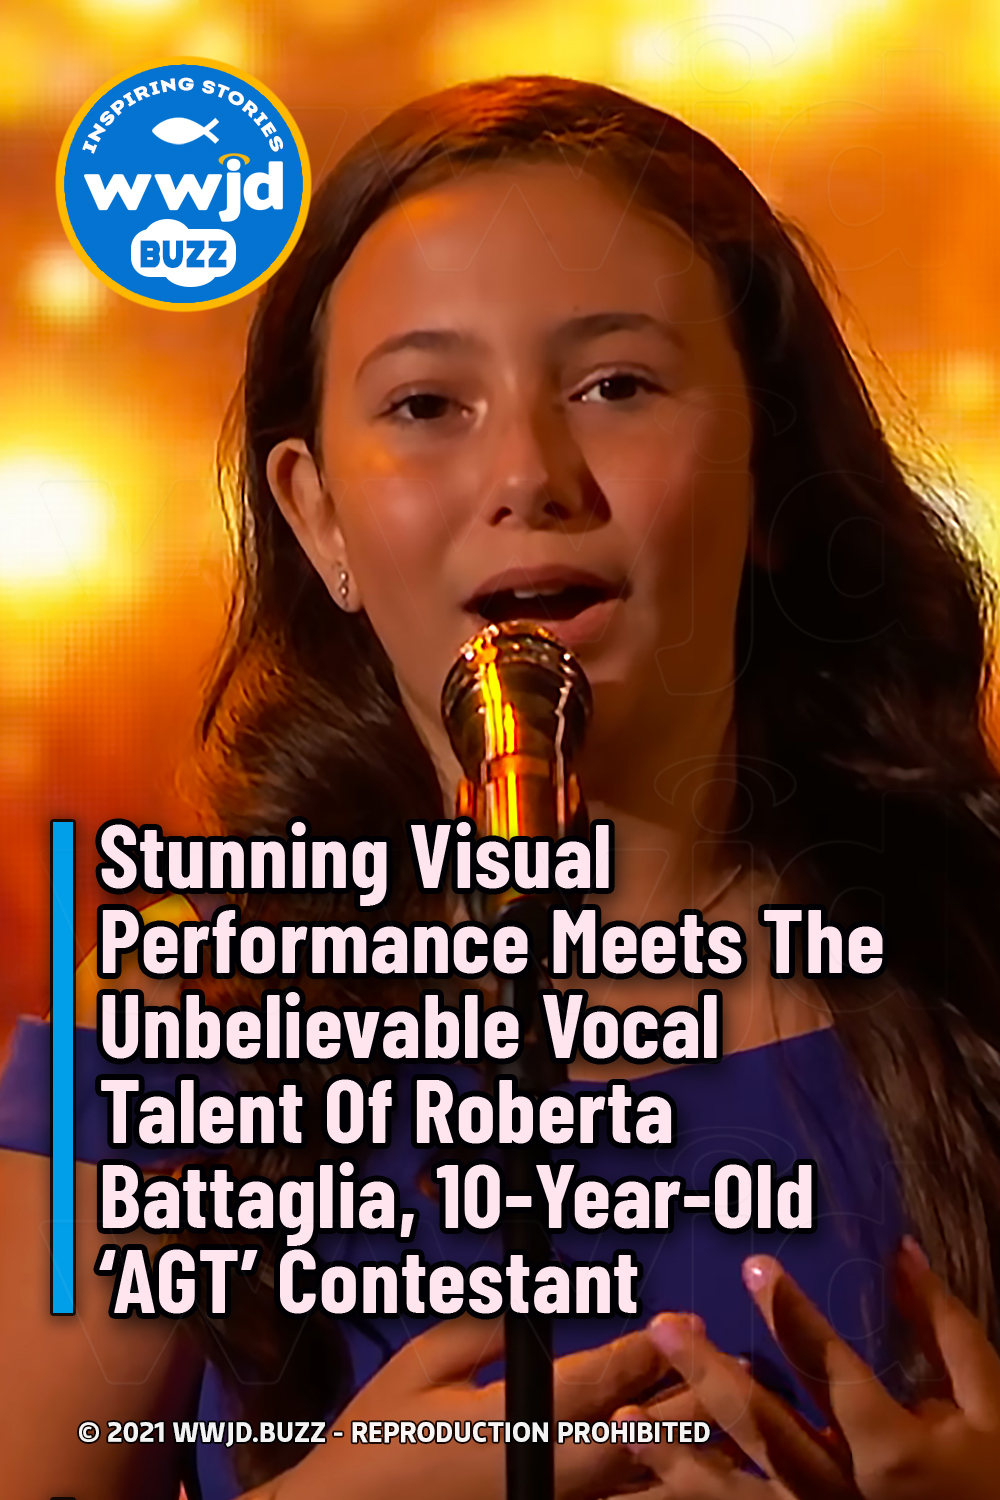 Stunning Visual Performance Meets The Unbelievable Vocal Talent Of Roberta Battaglia, 10-Year-Old ‘AGT’ Contestant